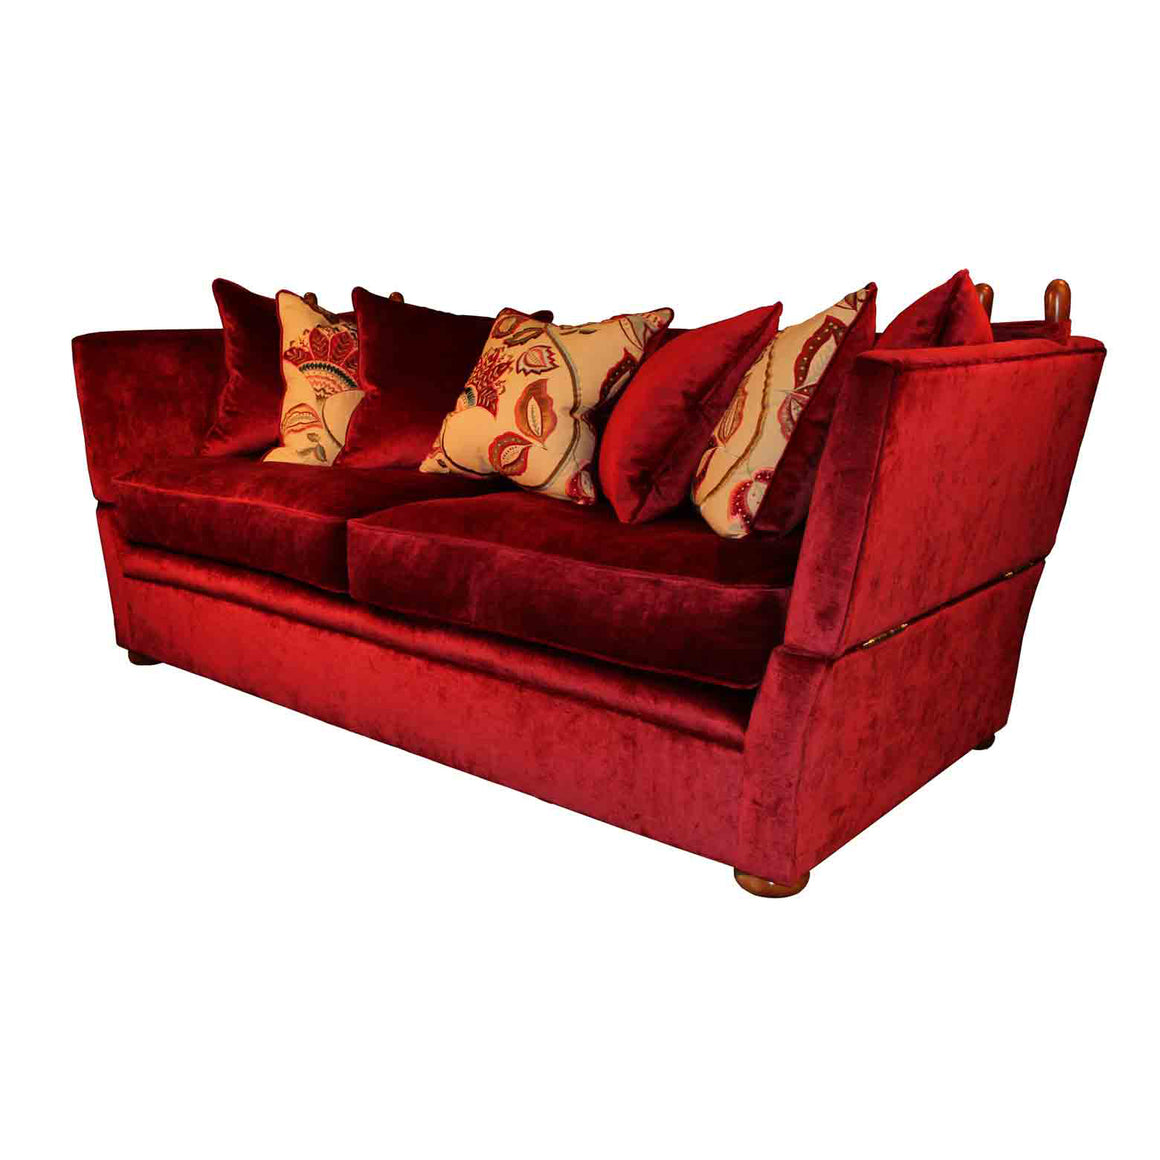 Greenwich Sofa and chairs in Monarch Velvet HALF PRICE TO ORDER